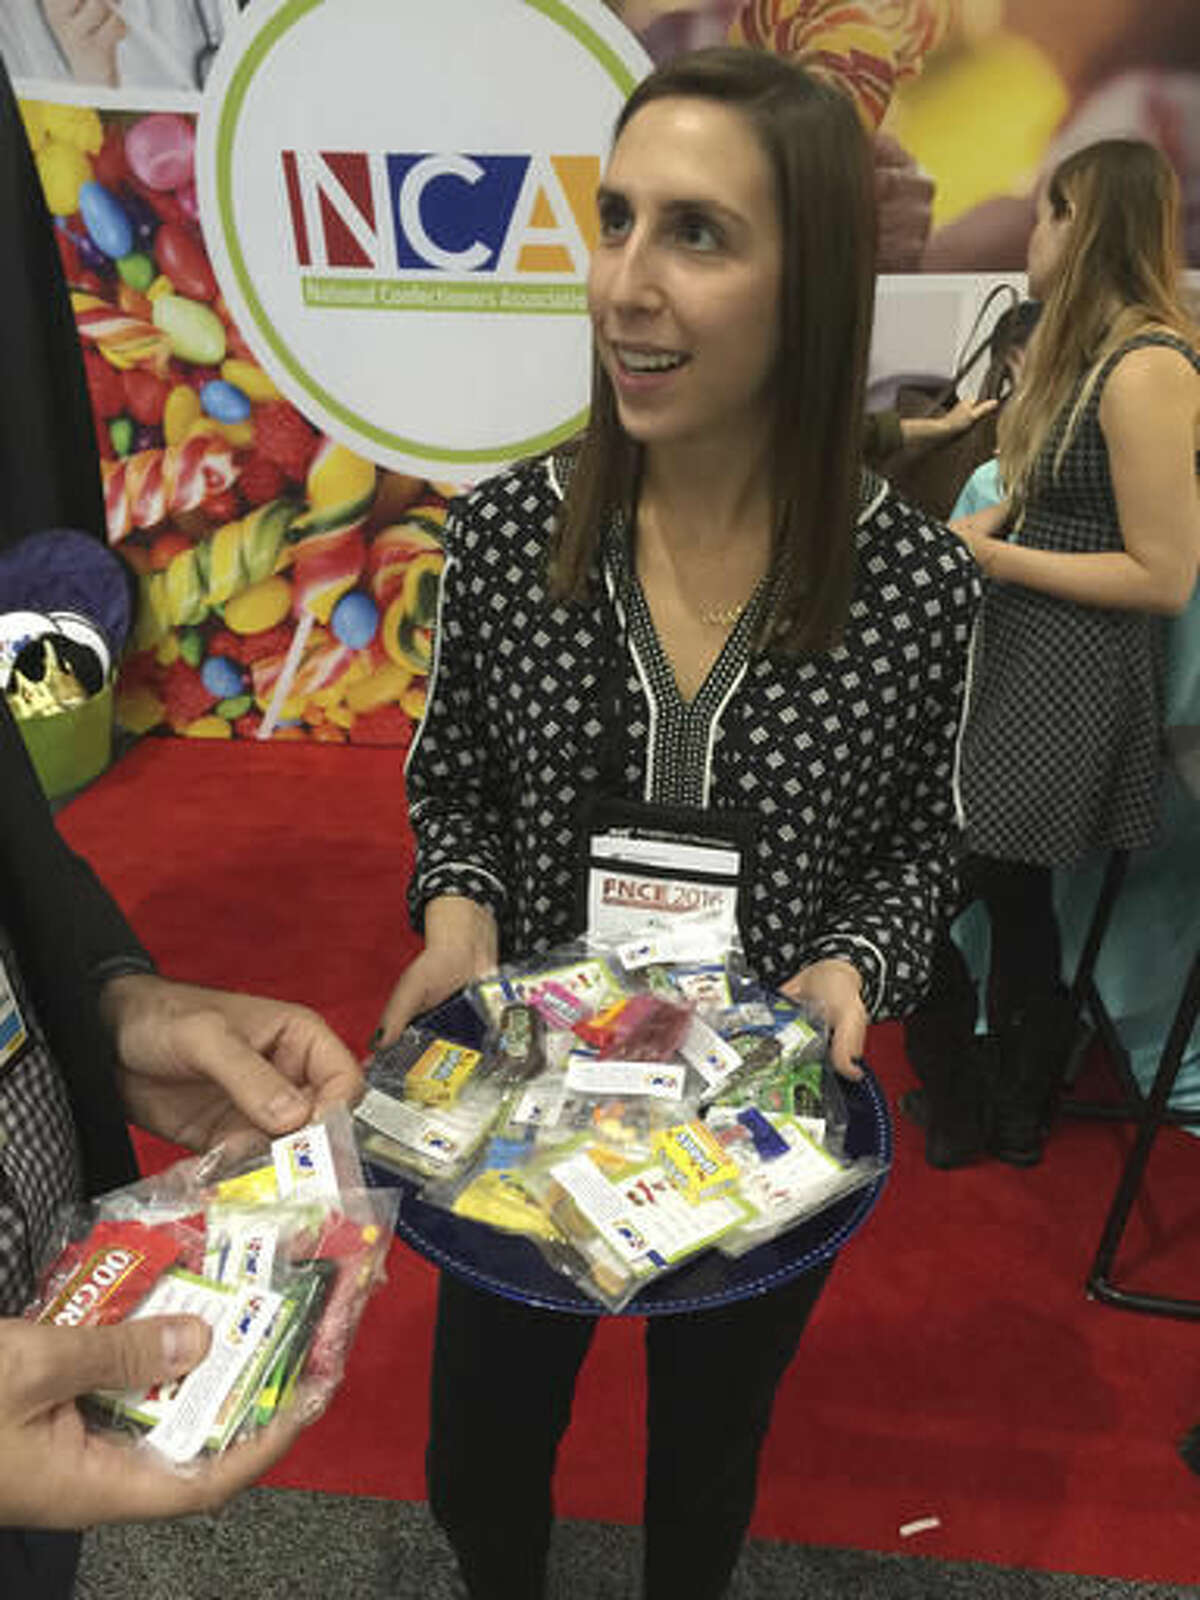 This Oct. 16, 2016, photo shows the National Confectioners Association’s booth at an annual dietitians' conference, where food companies and industry groups explained how their products fit into a healthy diet. The presence of major food companies and industry groups at the conference in Boston underscored the conflict-of-interest issues in the nutrition field. (AP Photo/Candice Choi)